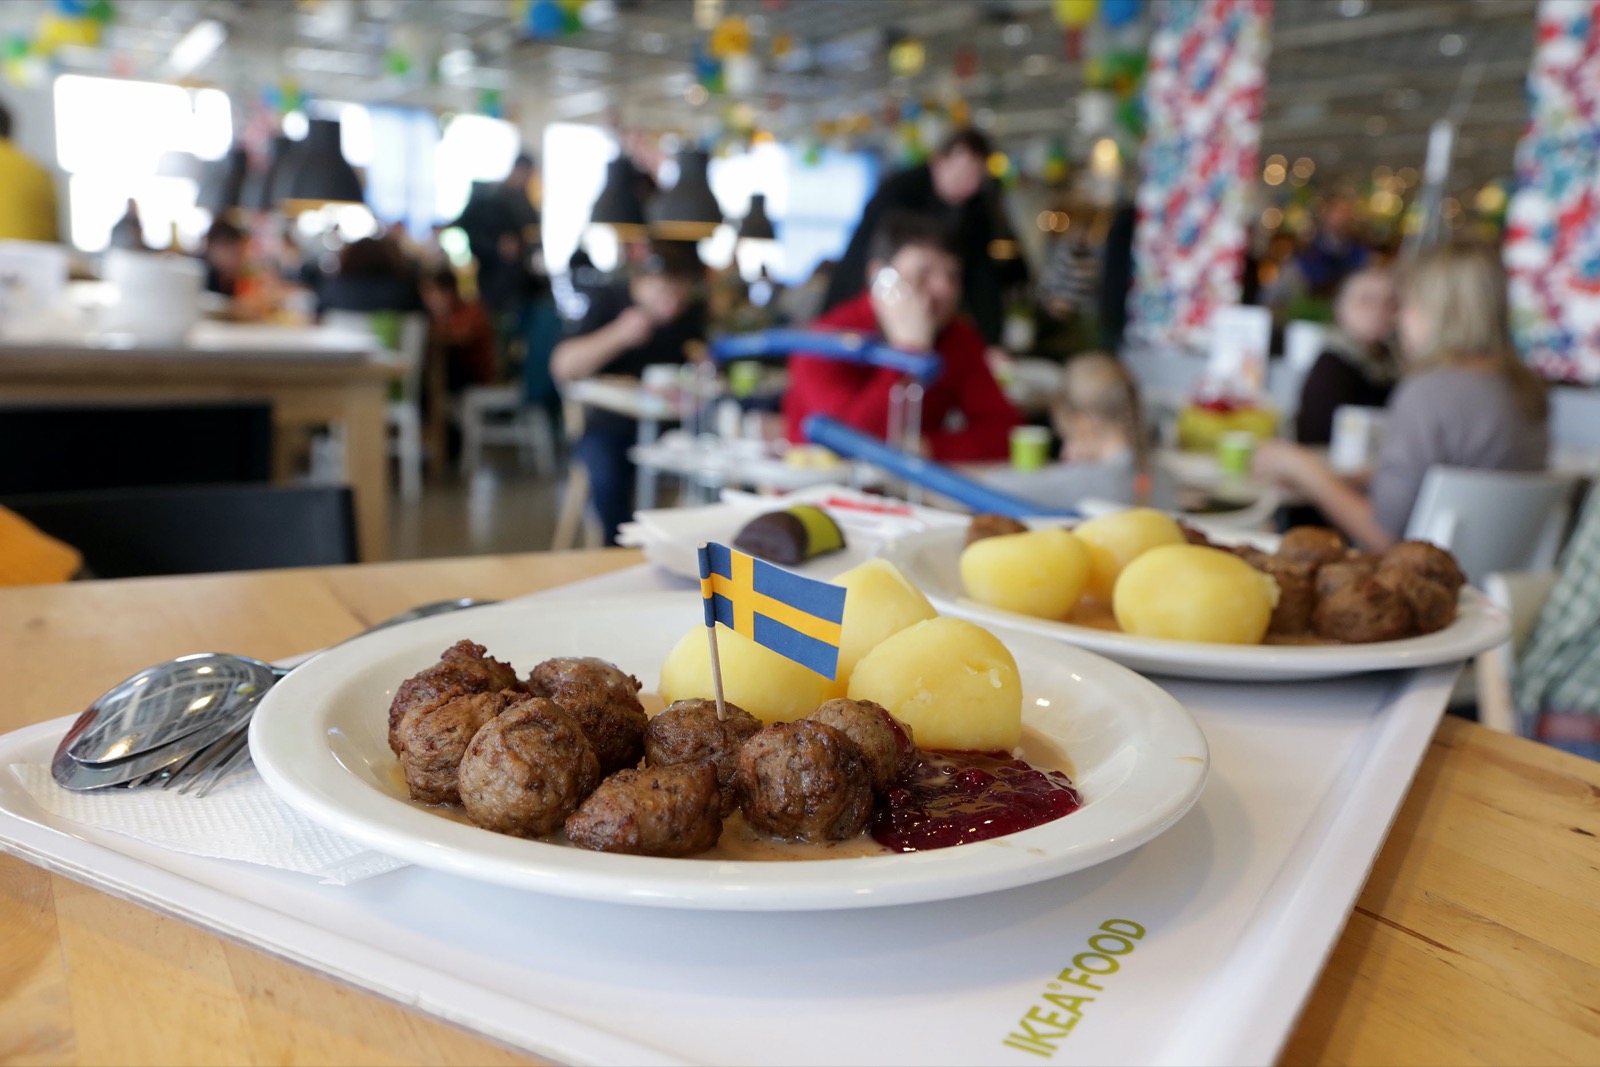 ❓ Can You Guess What These Countries Are Based on the 3 Clues I Give You? IKEA Swedish meatballs